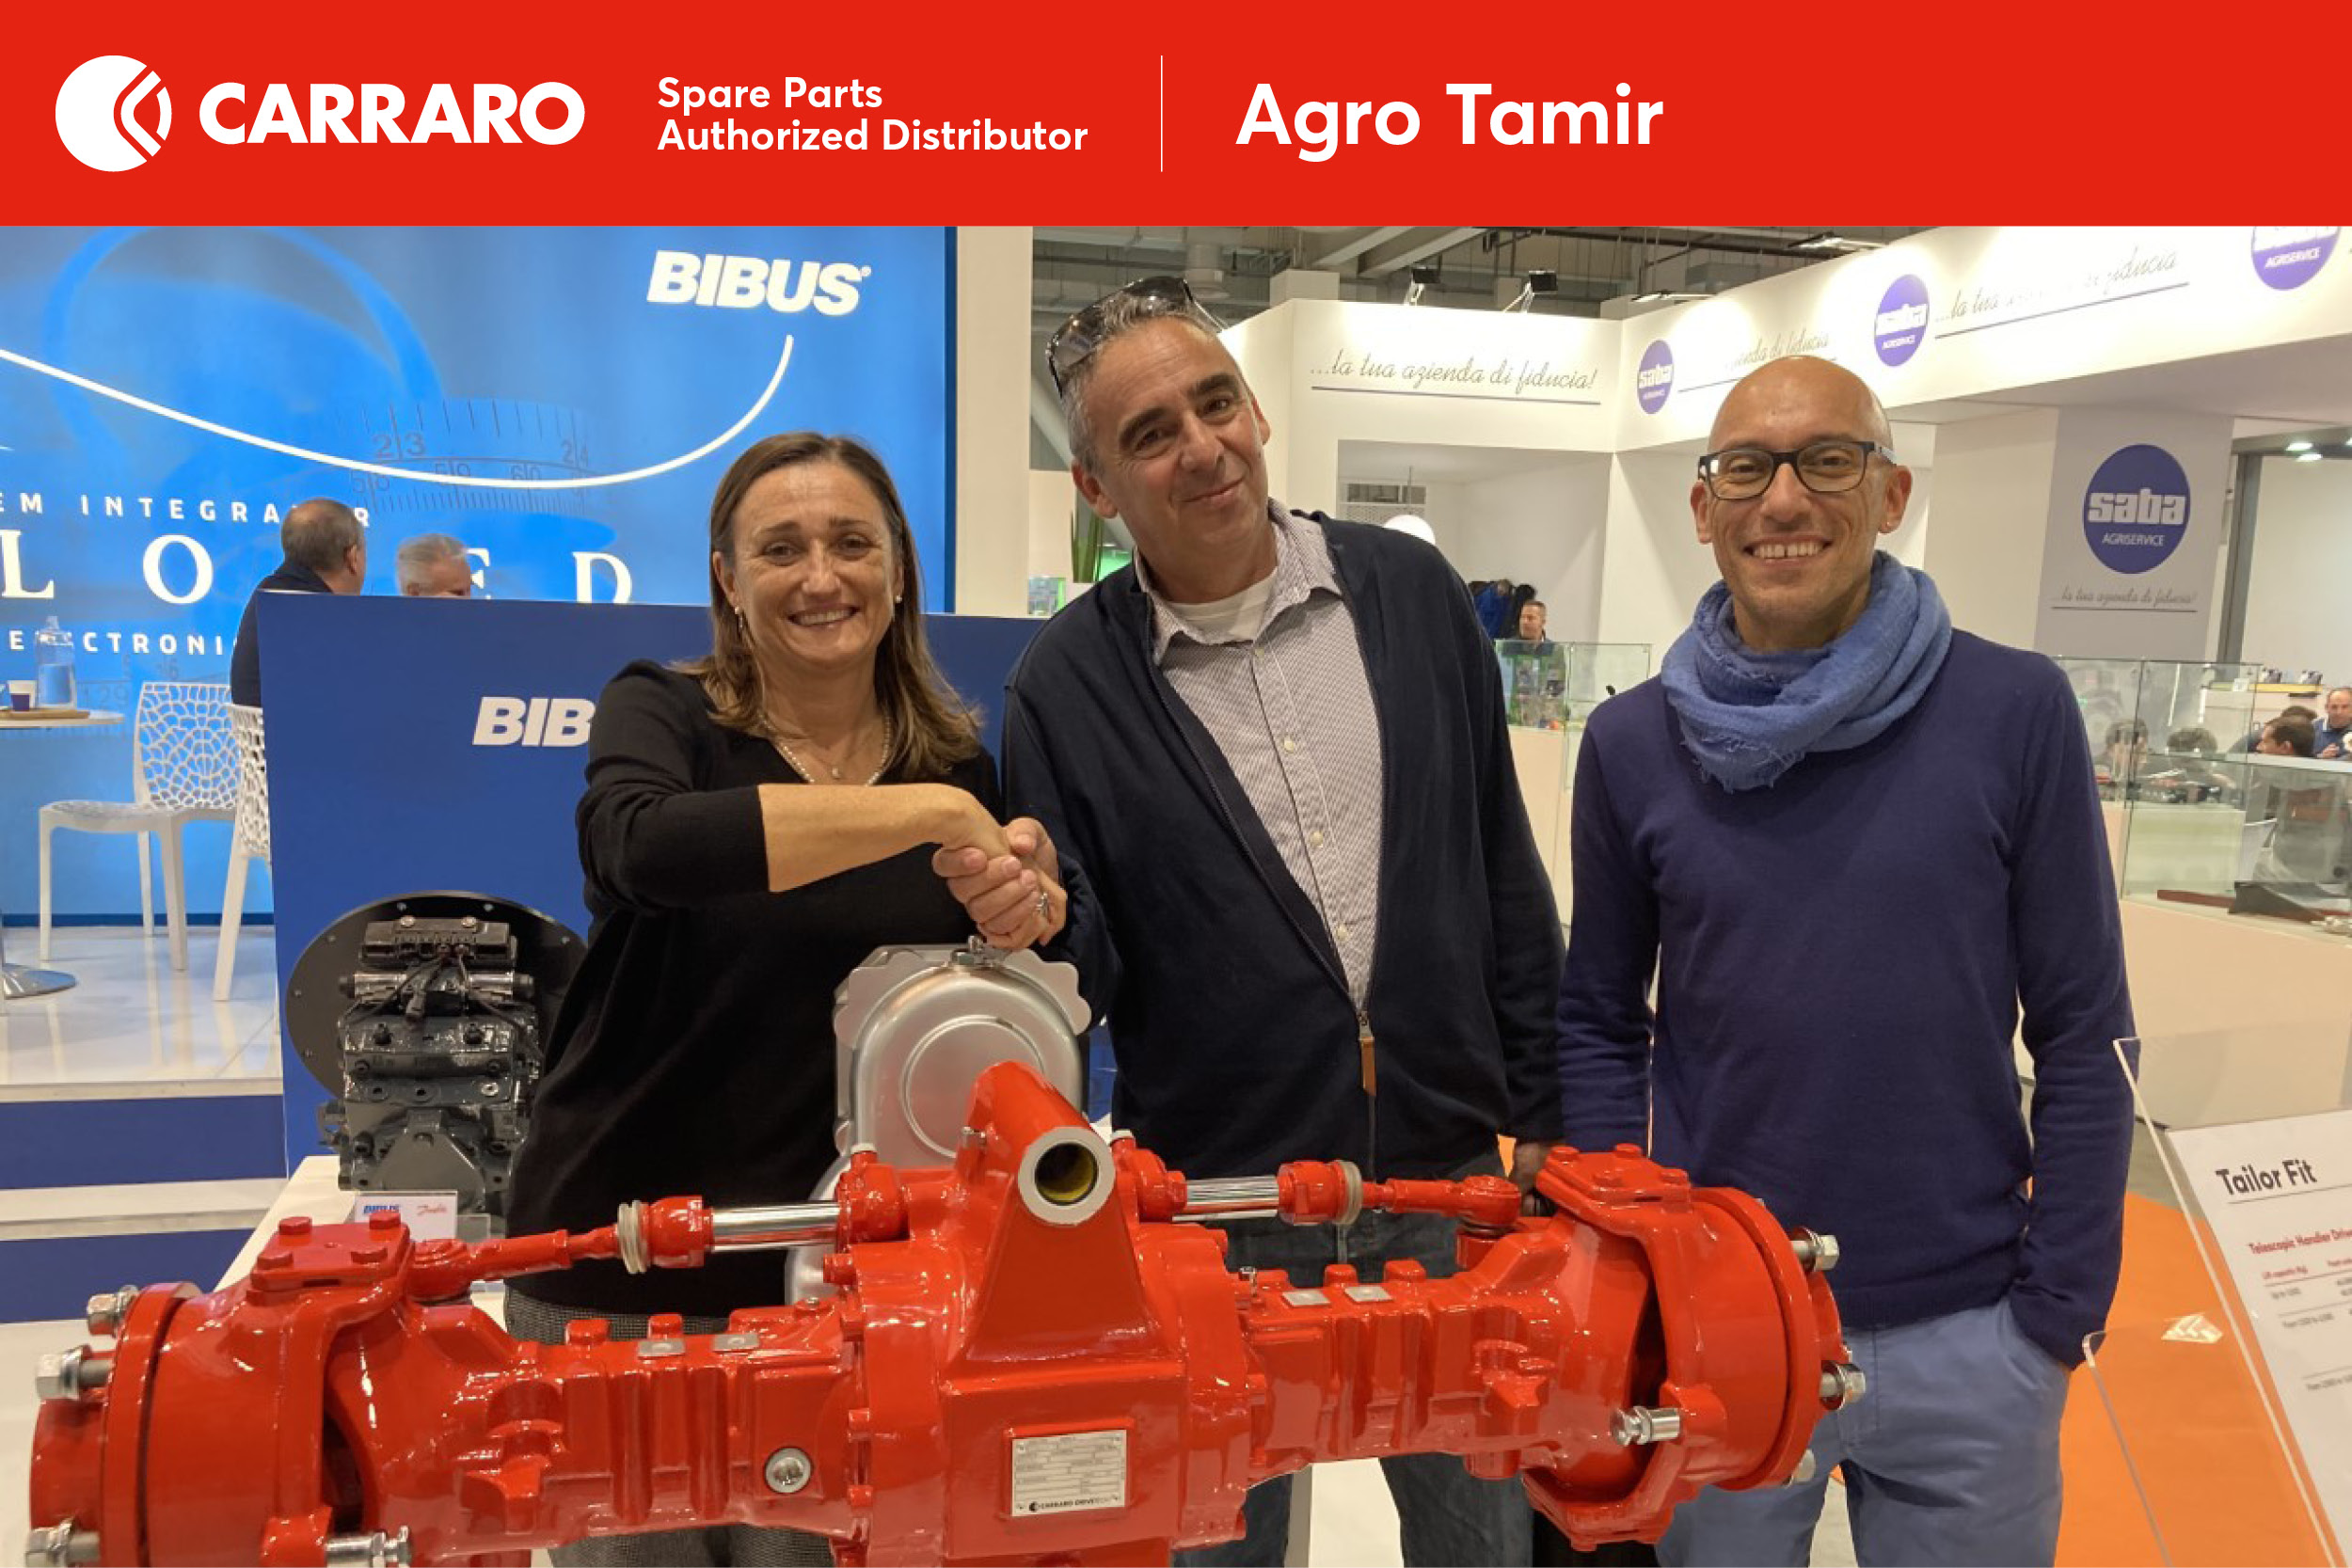 A new Carraro Spare Partners in Israel!